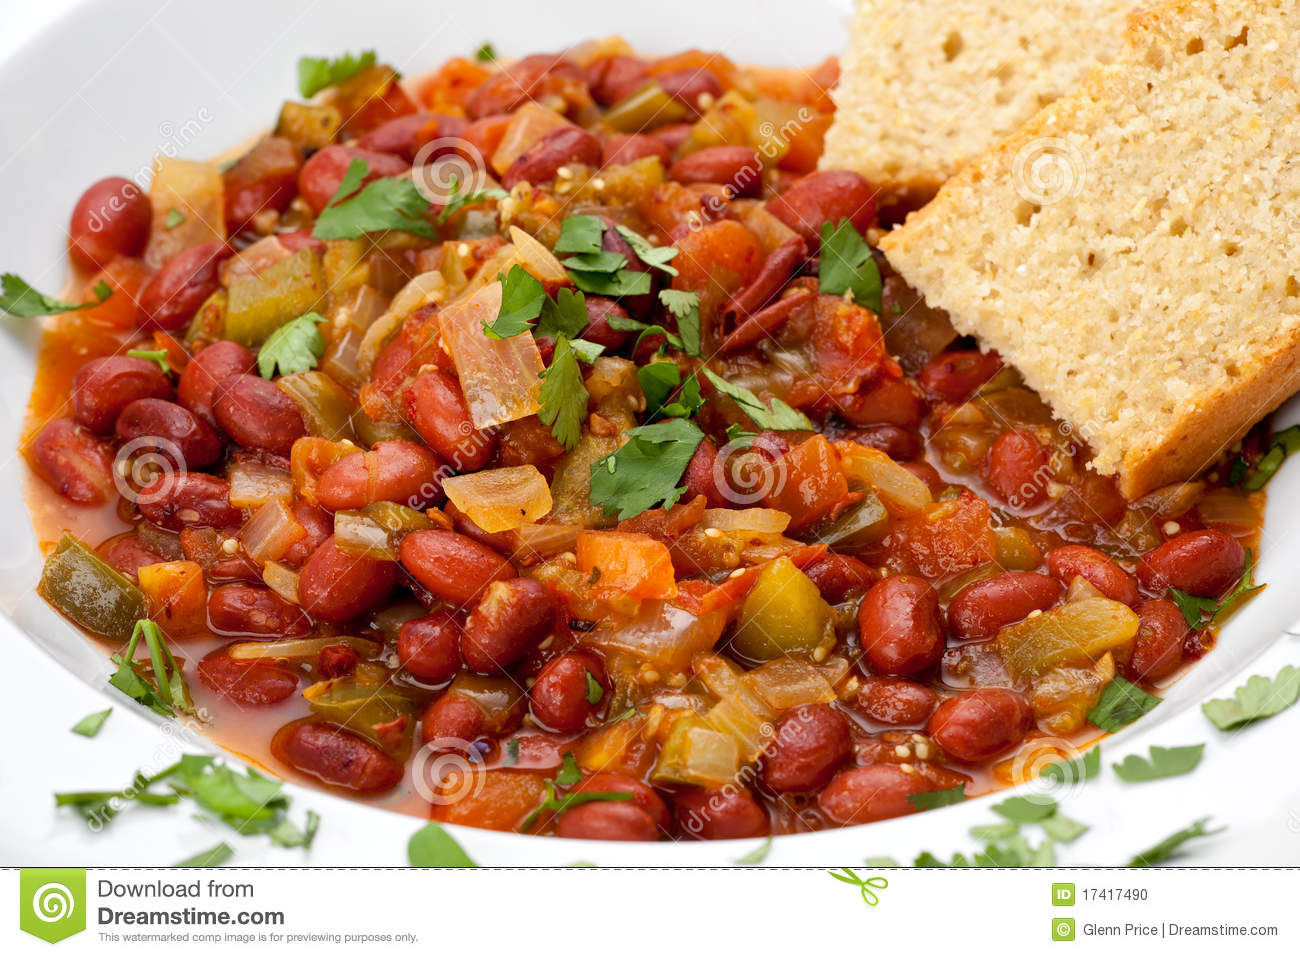 Up Of Vegetarian Chili With Beans And Cornbread In A White Bowl